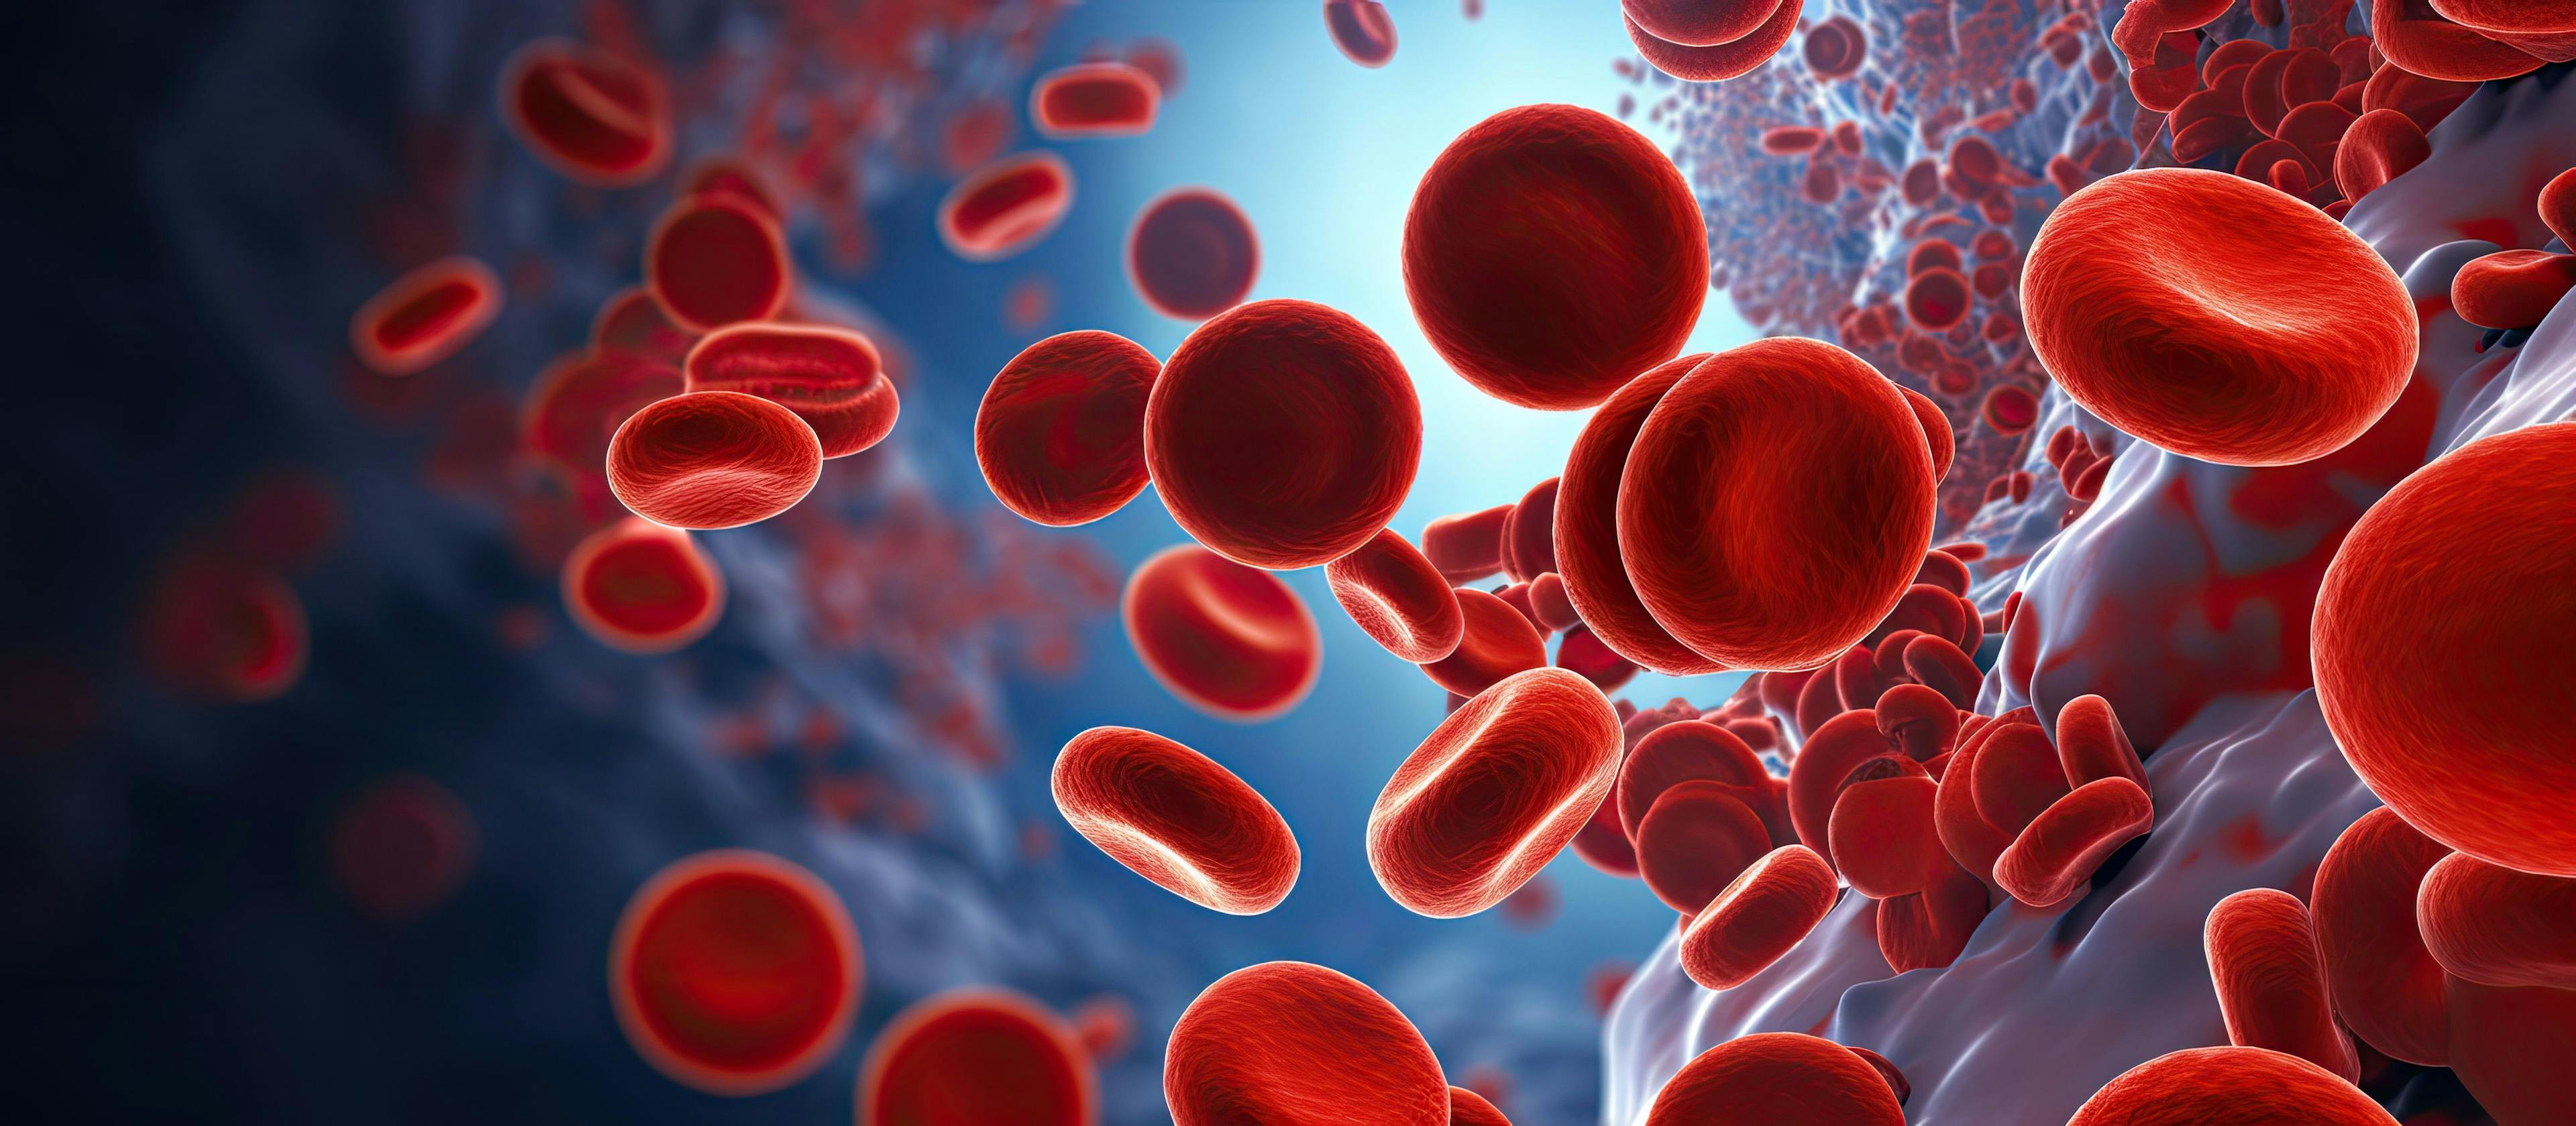 Microscopic images of red blood cells, activated platelets, and white blood cells as a result of leukemia: © AkuAku - stock.adobe.com